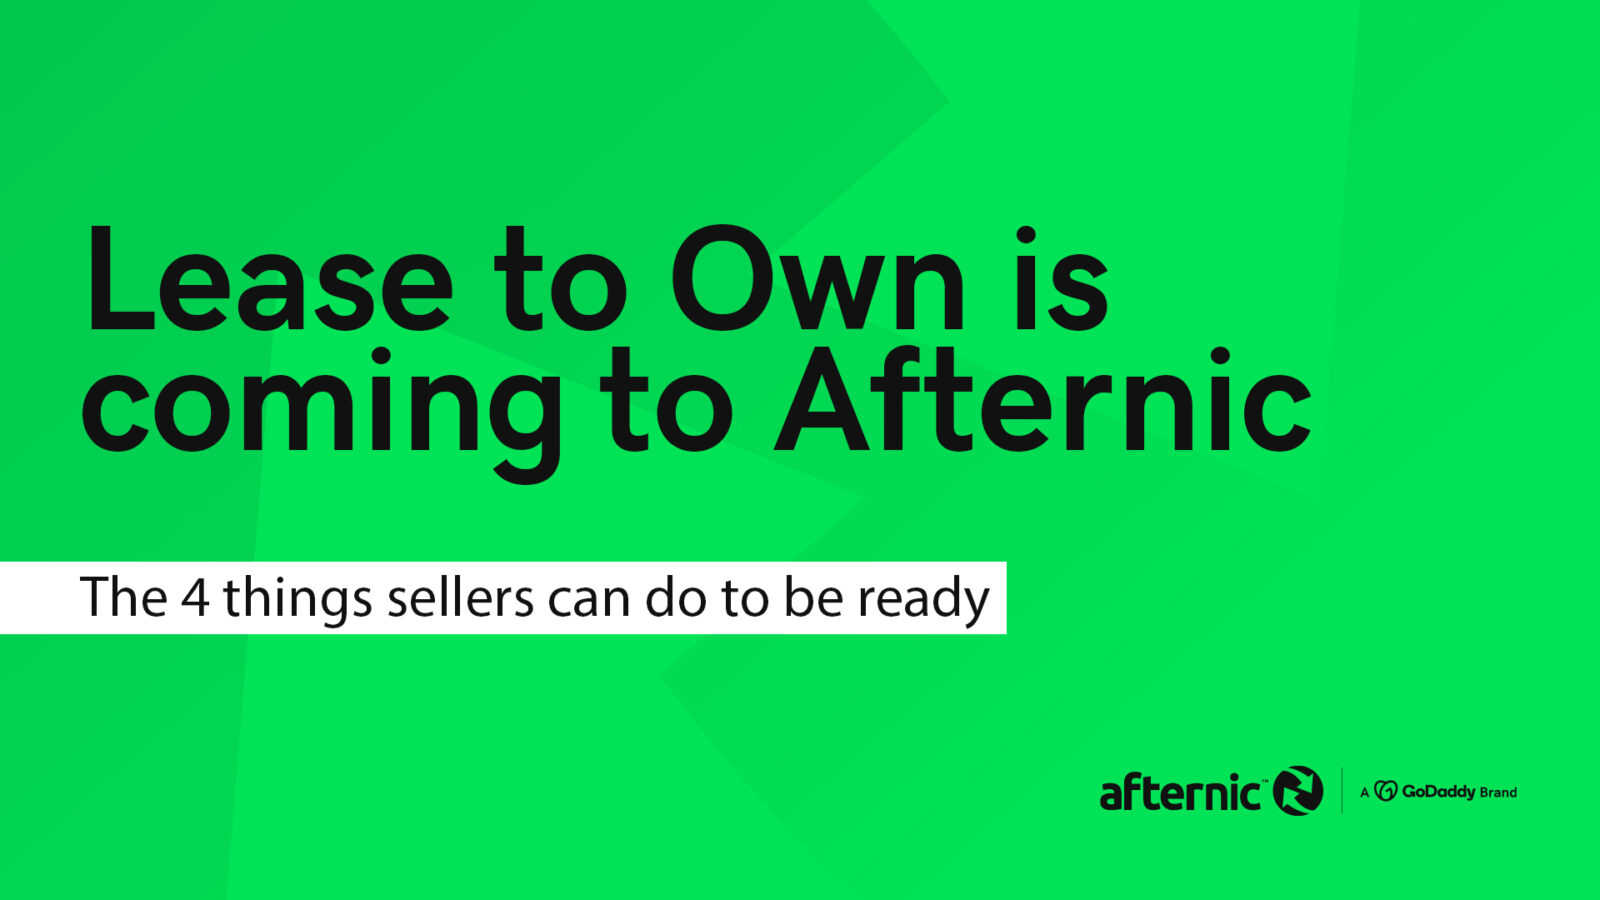 Lease to Own is coming to Afternic. Here are the 4 things sellers can do today to be ready.